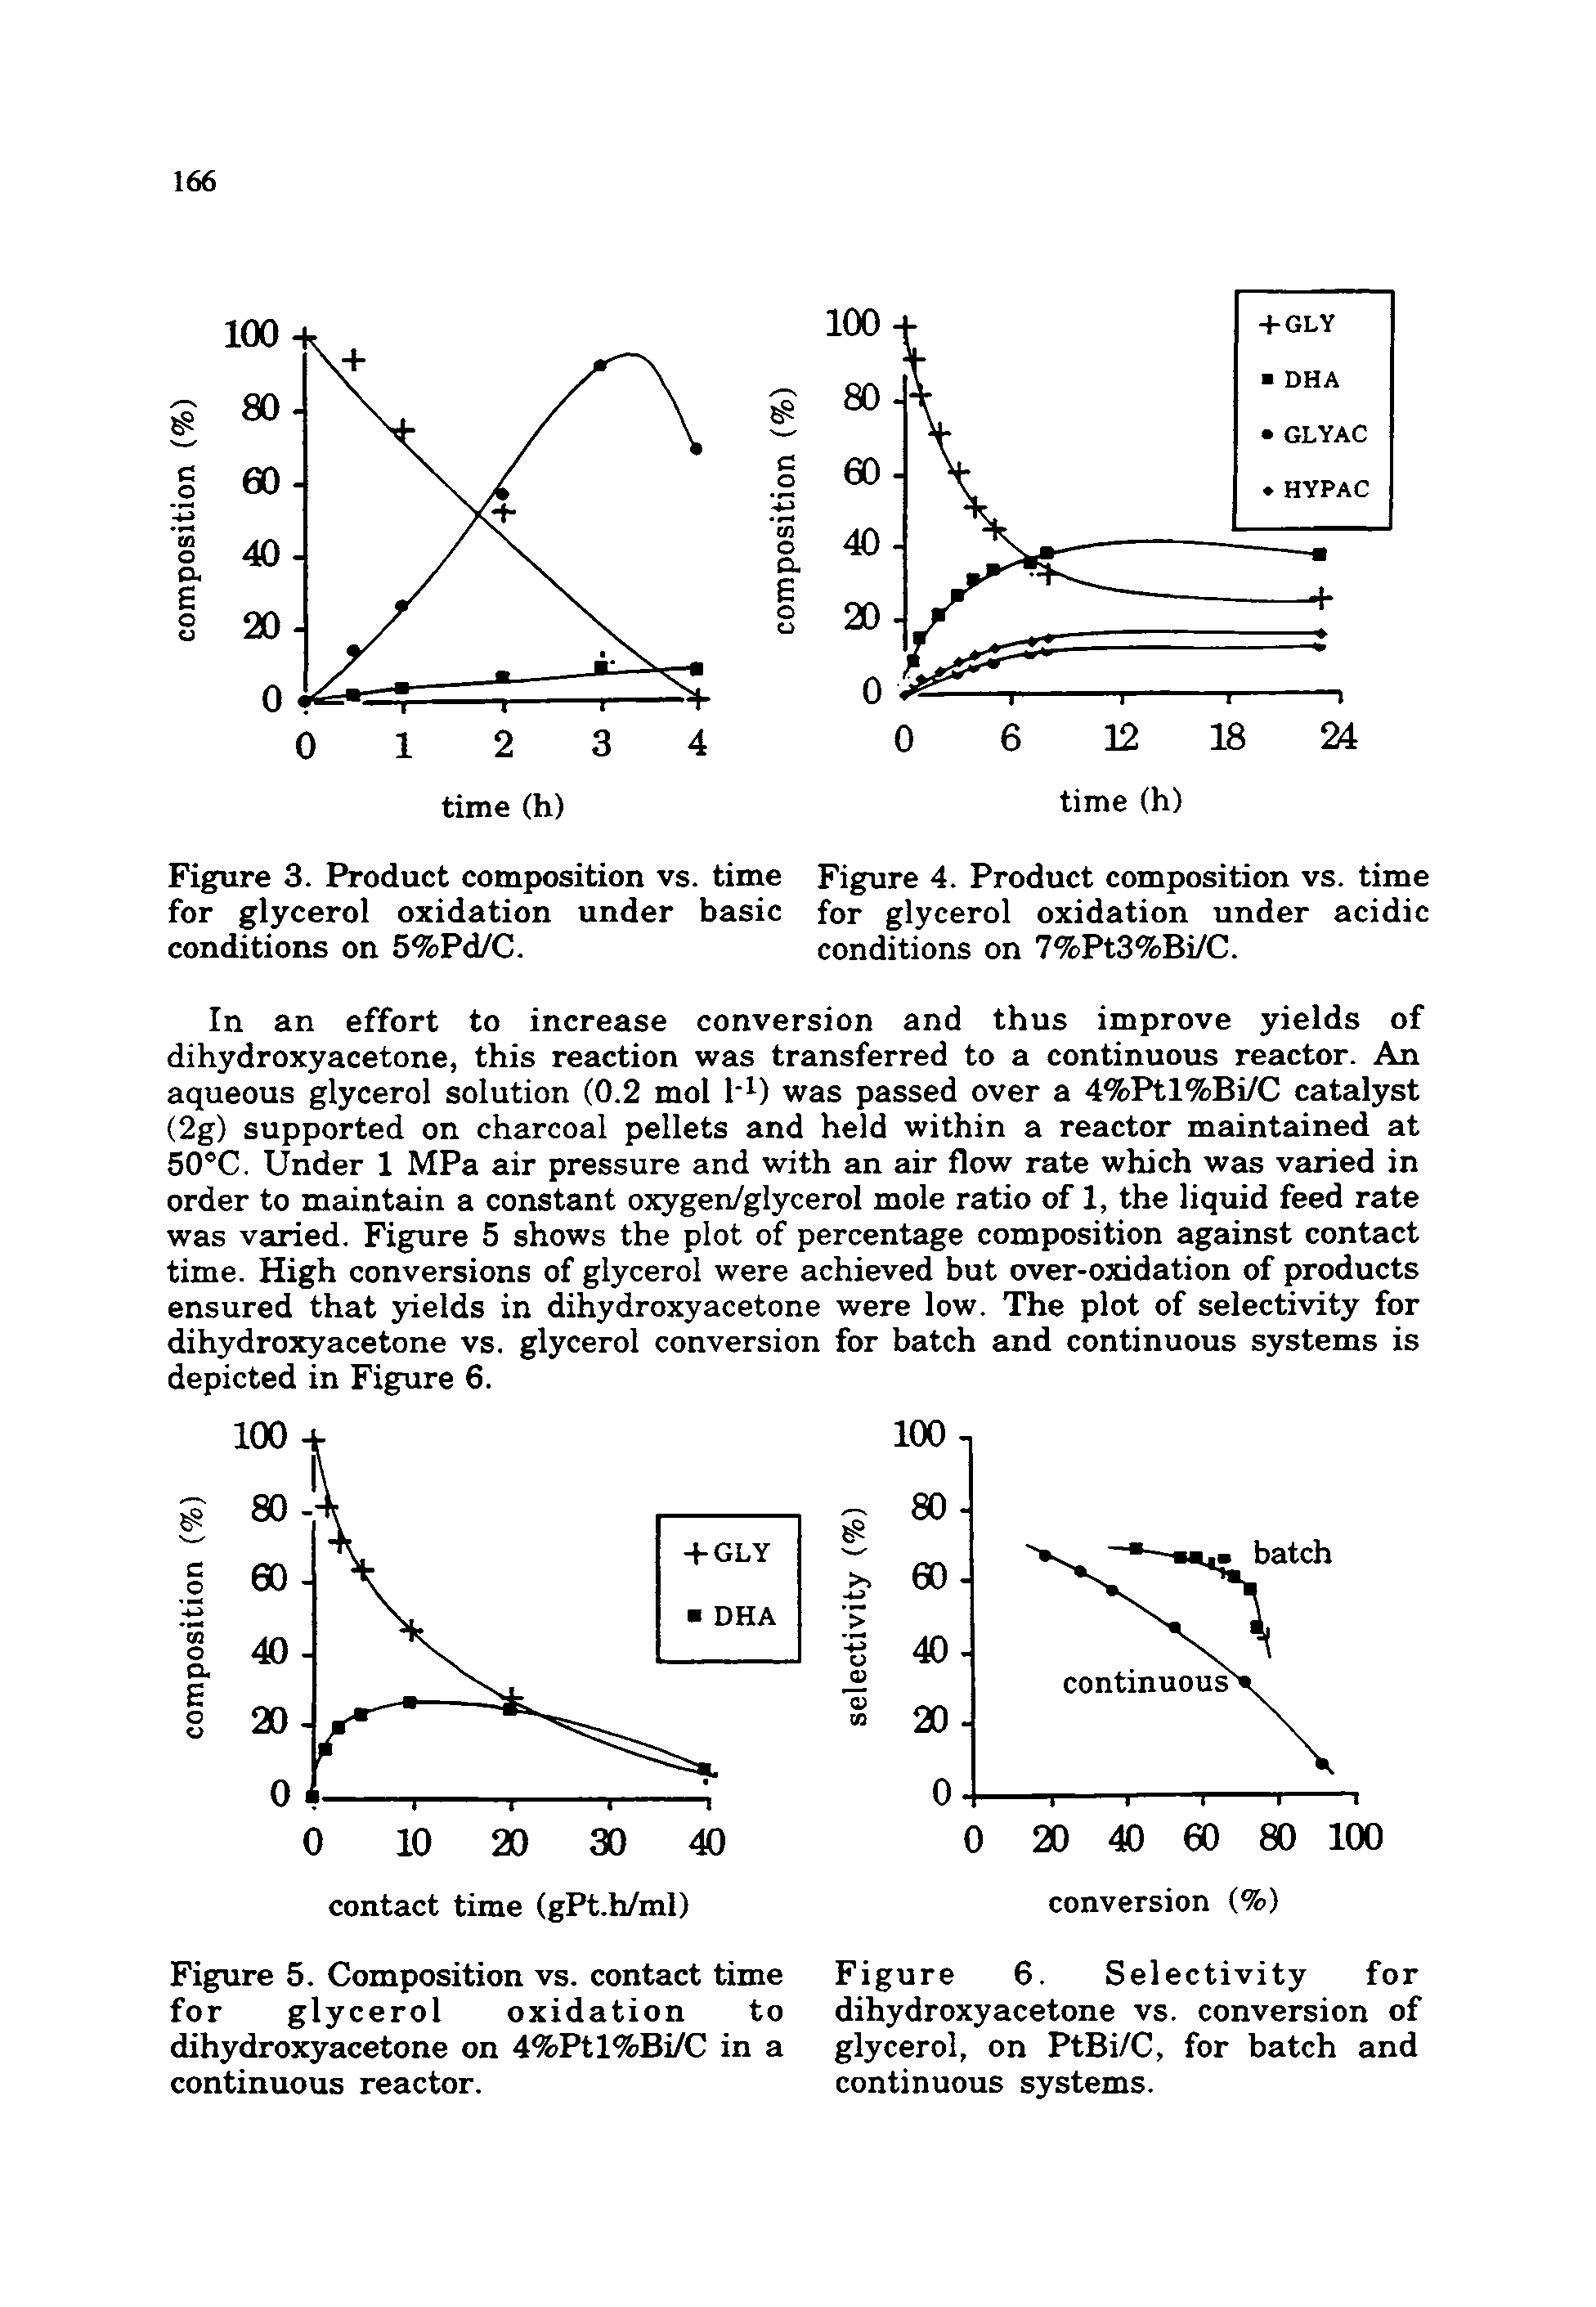 Figure 6. Selectivity for dihydroxyacetone vs. conversion of glycerol, on PtBi/C, for batch and continuous systems.